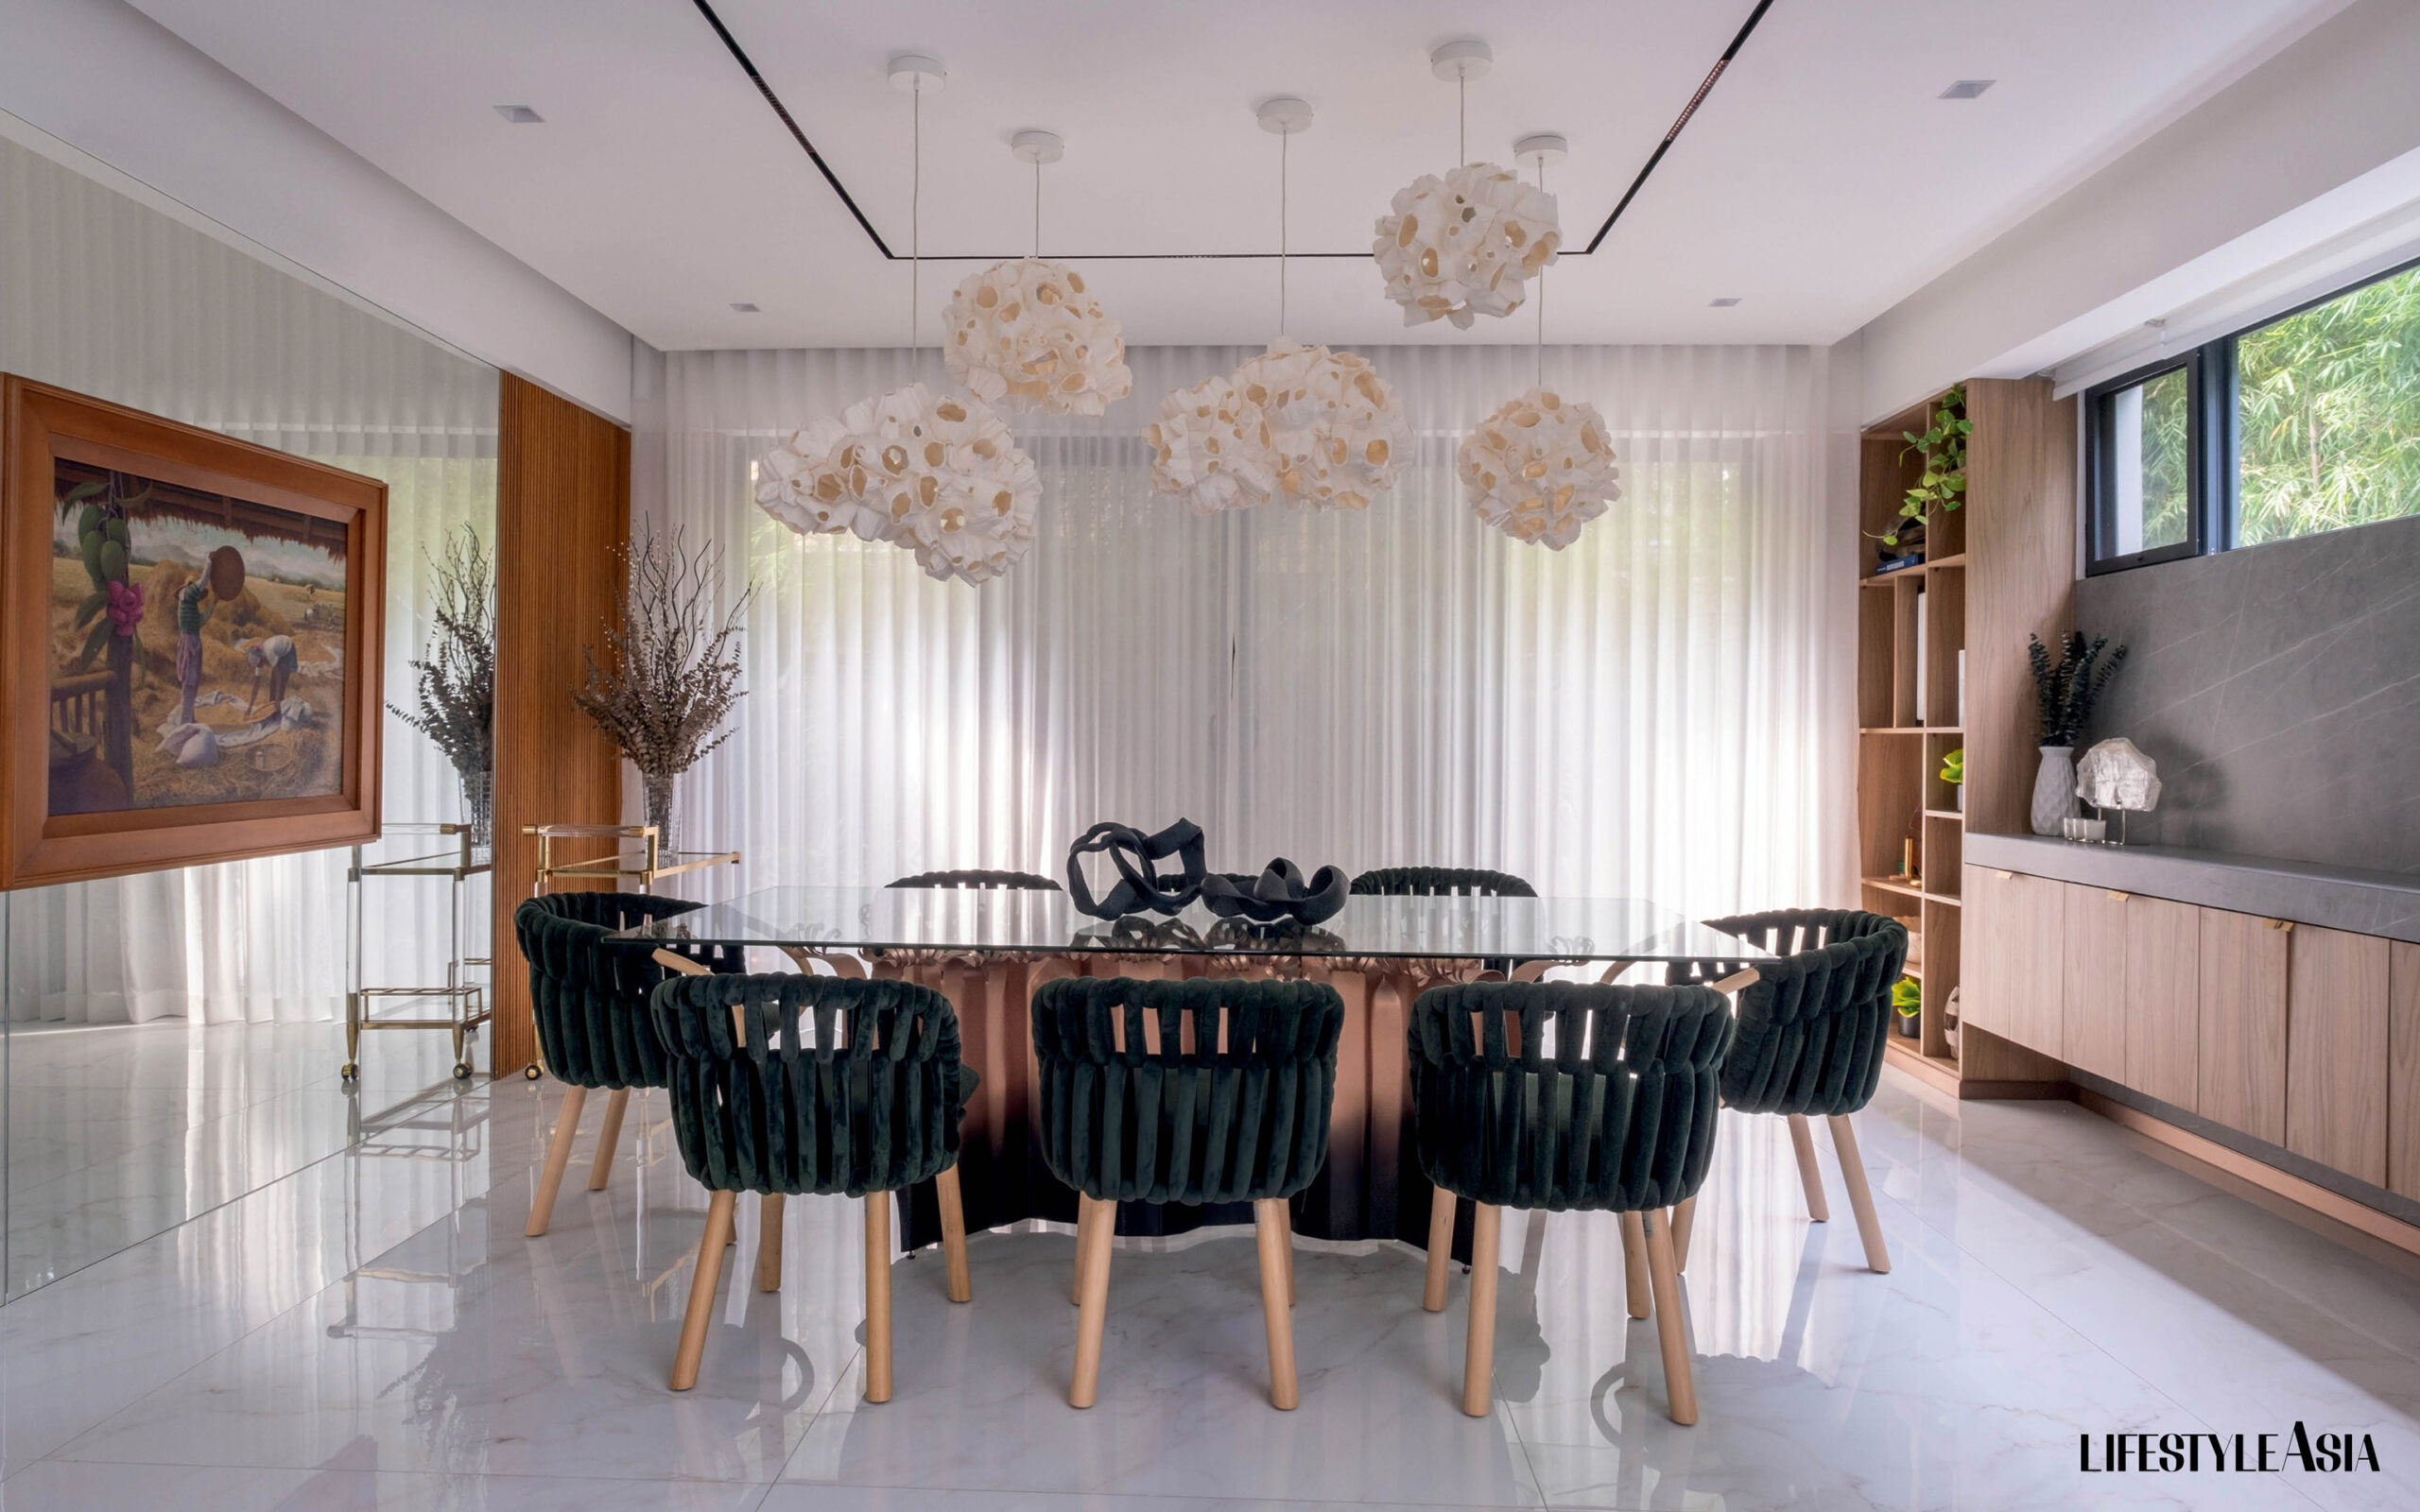 Dining space with all the furniture and lights by Kenneth Cobonpue